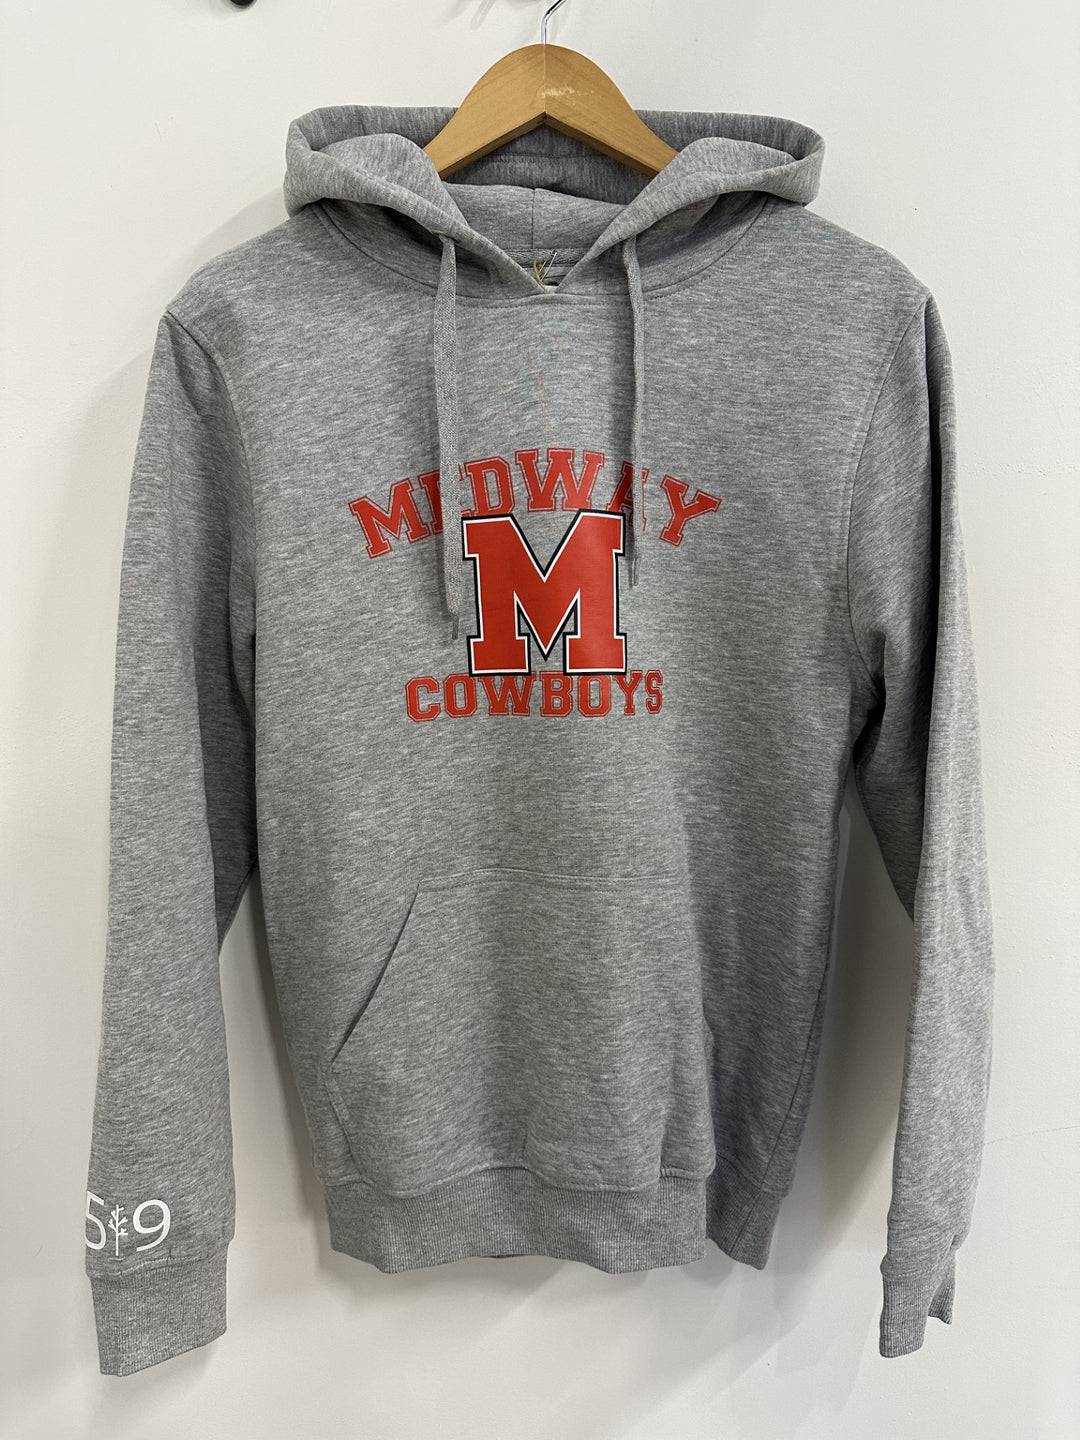 MEDWAY COWBOYS HOODIE (SMALL UNISEX)